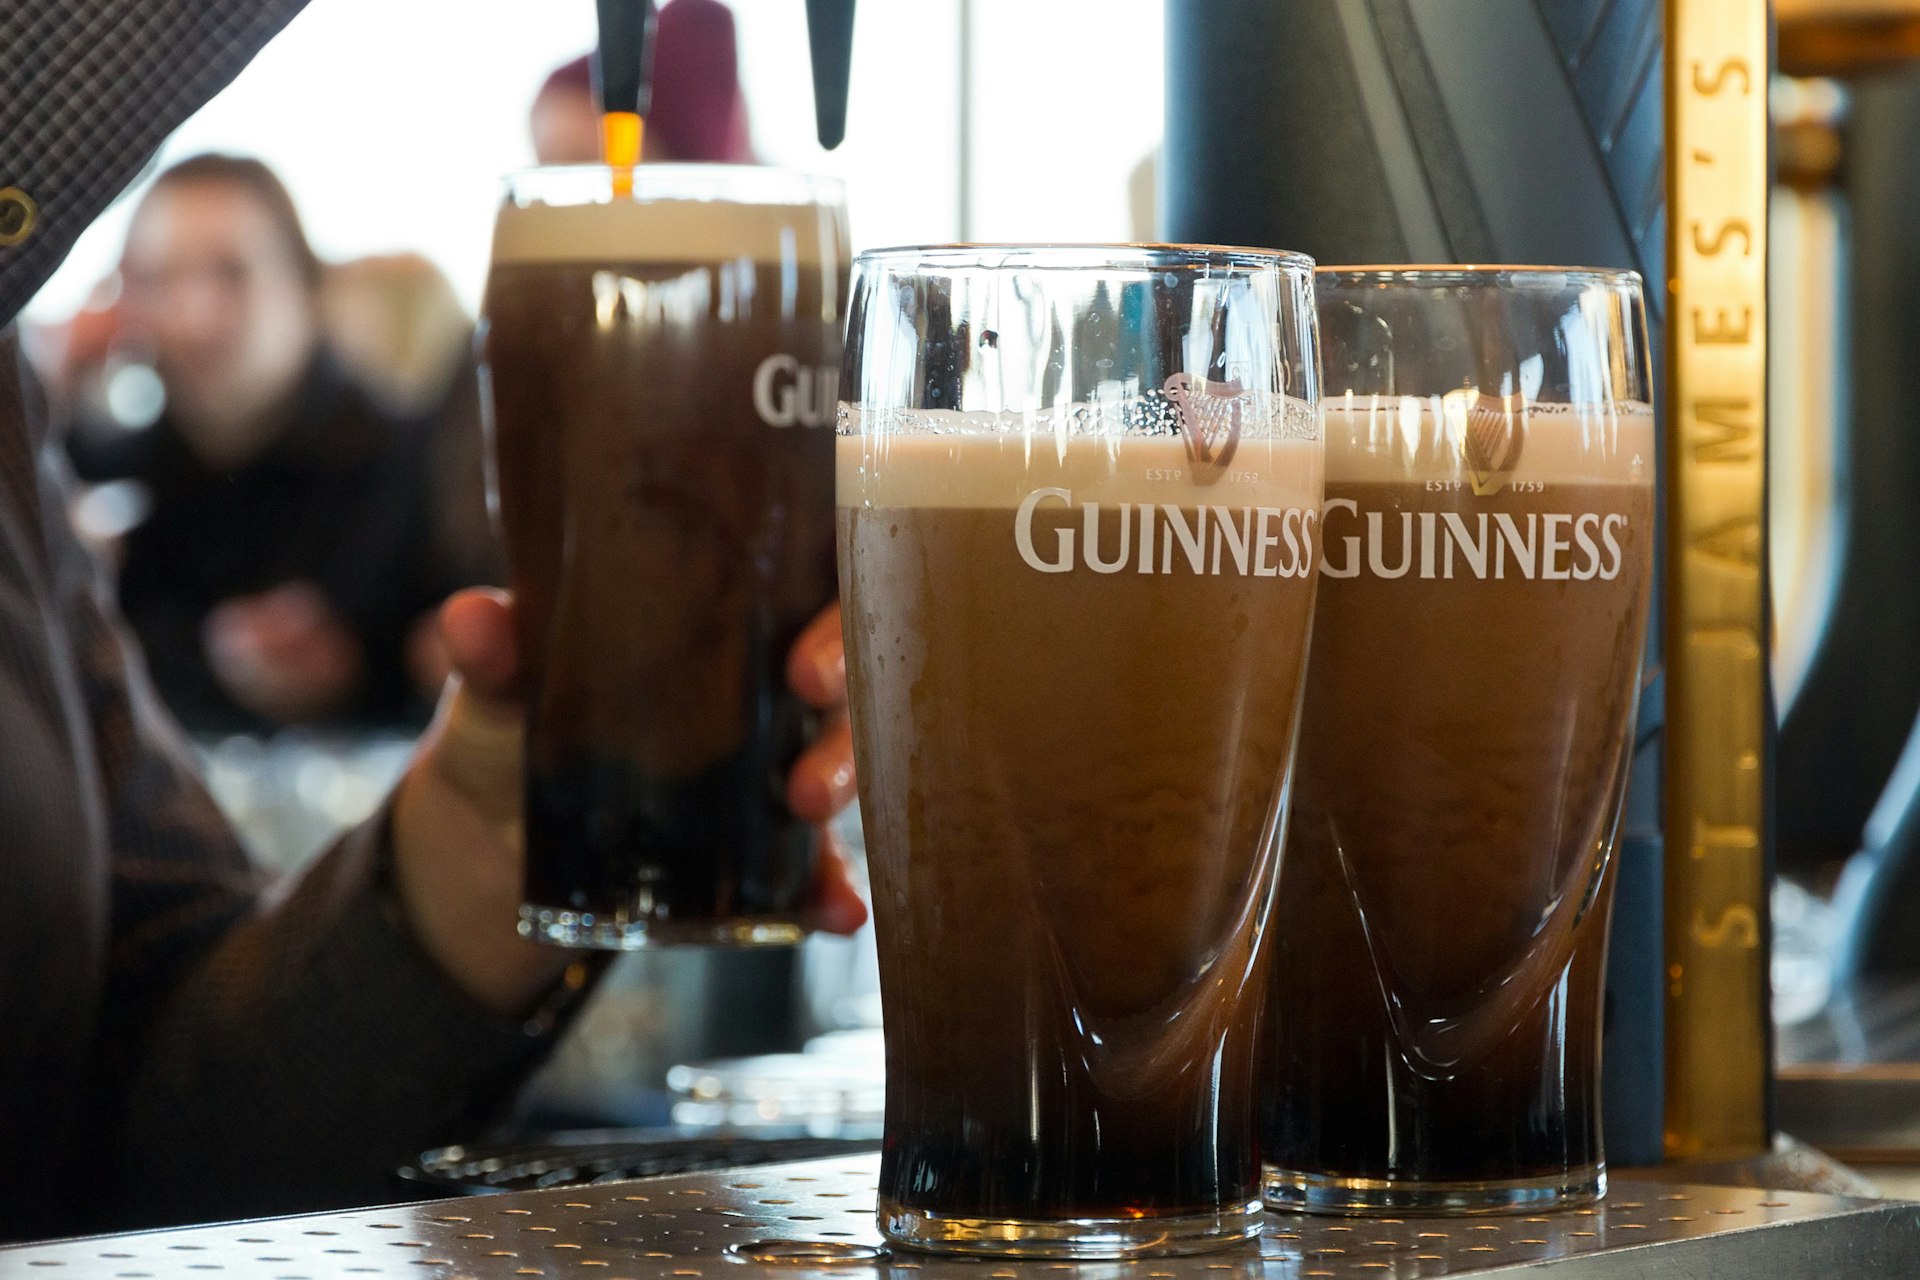 Three pints of Guinness are being poured at The Guinness Storehouse in Dublin, Ireland